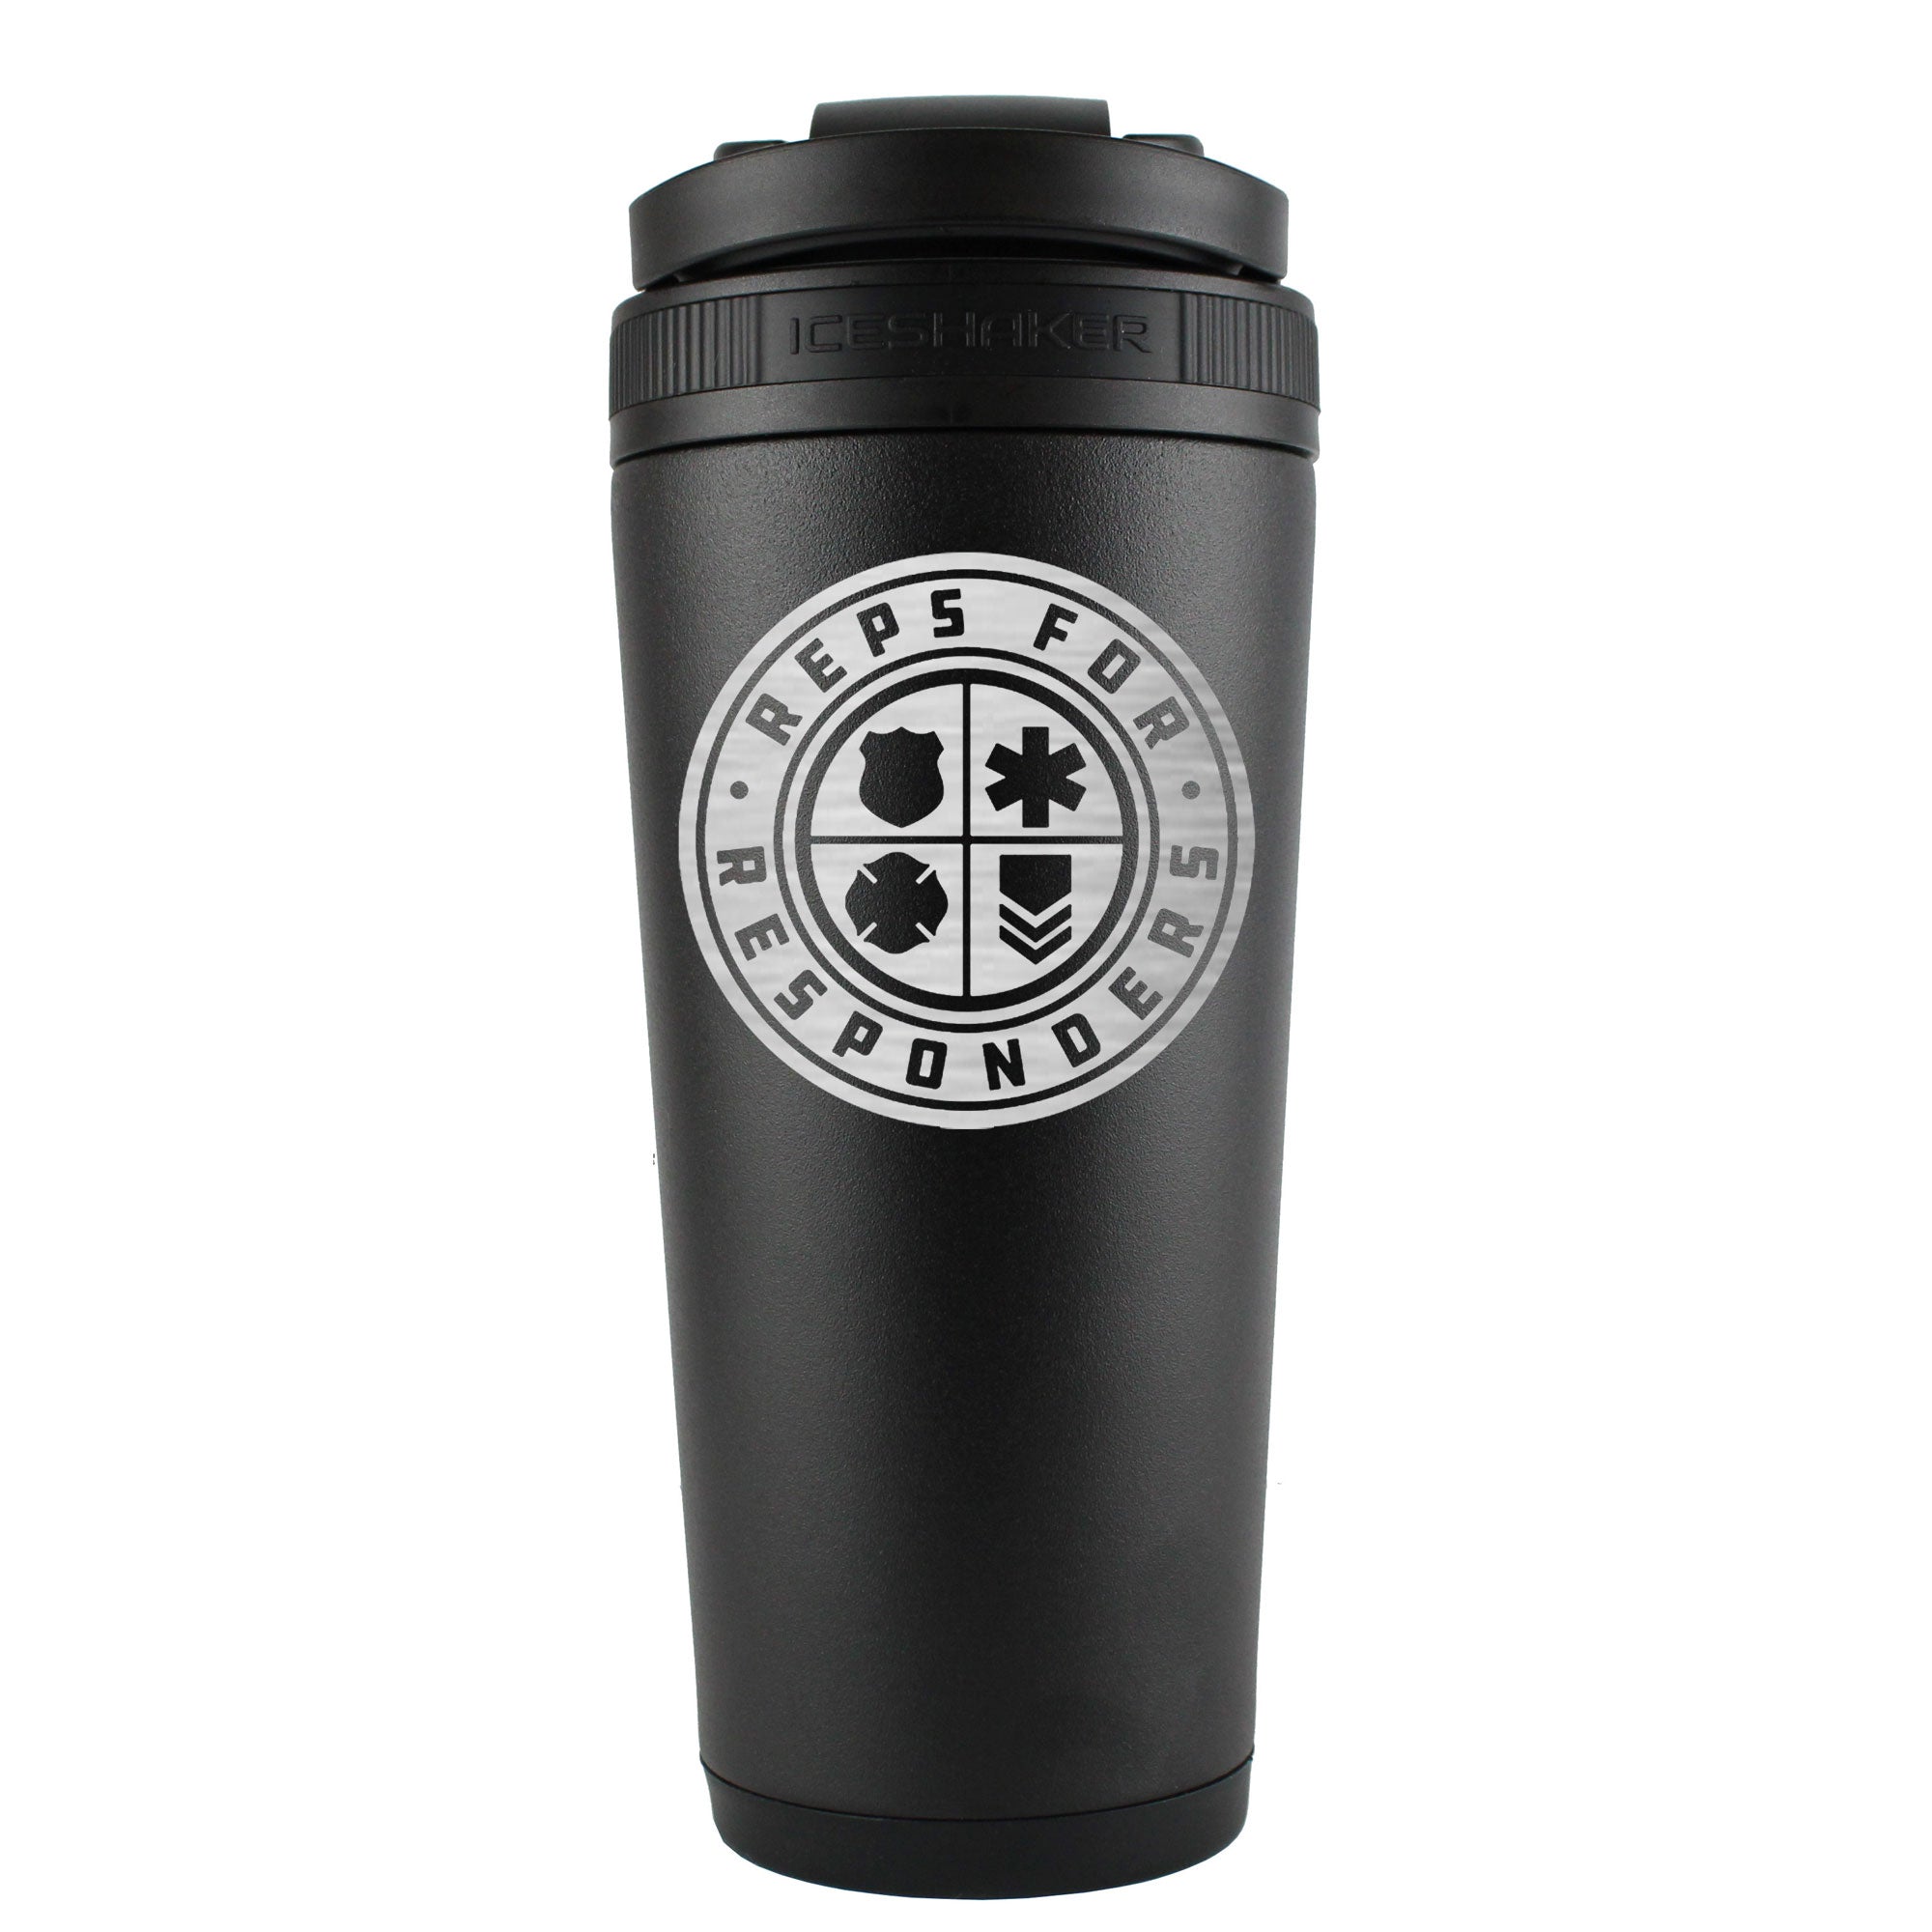 Reps for Responders 26oz Ice Shakers